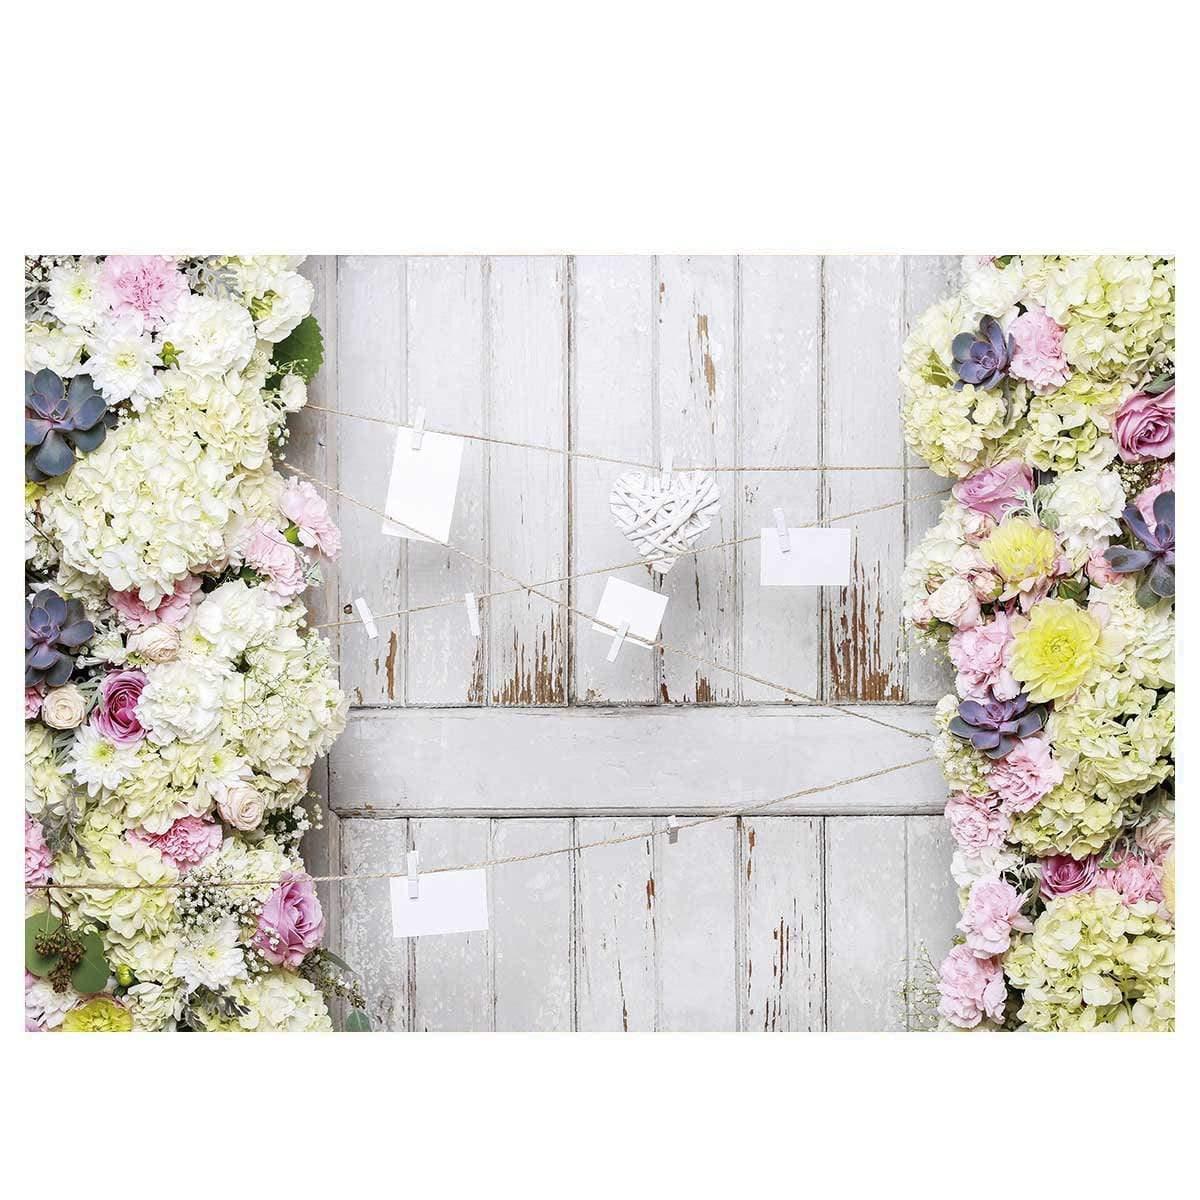 Allenjoy White Wooden Wall with Floral Backdrop for Mother's Day - Allenjoystudio